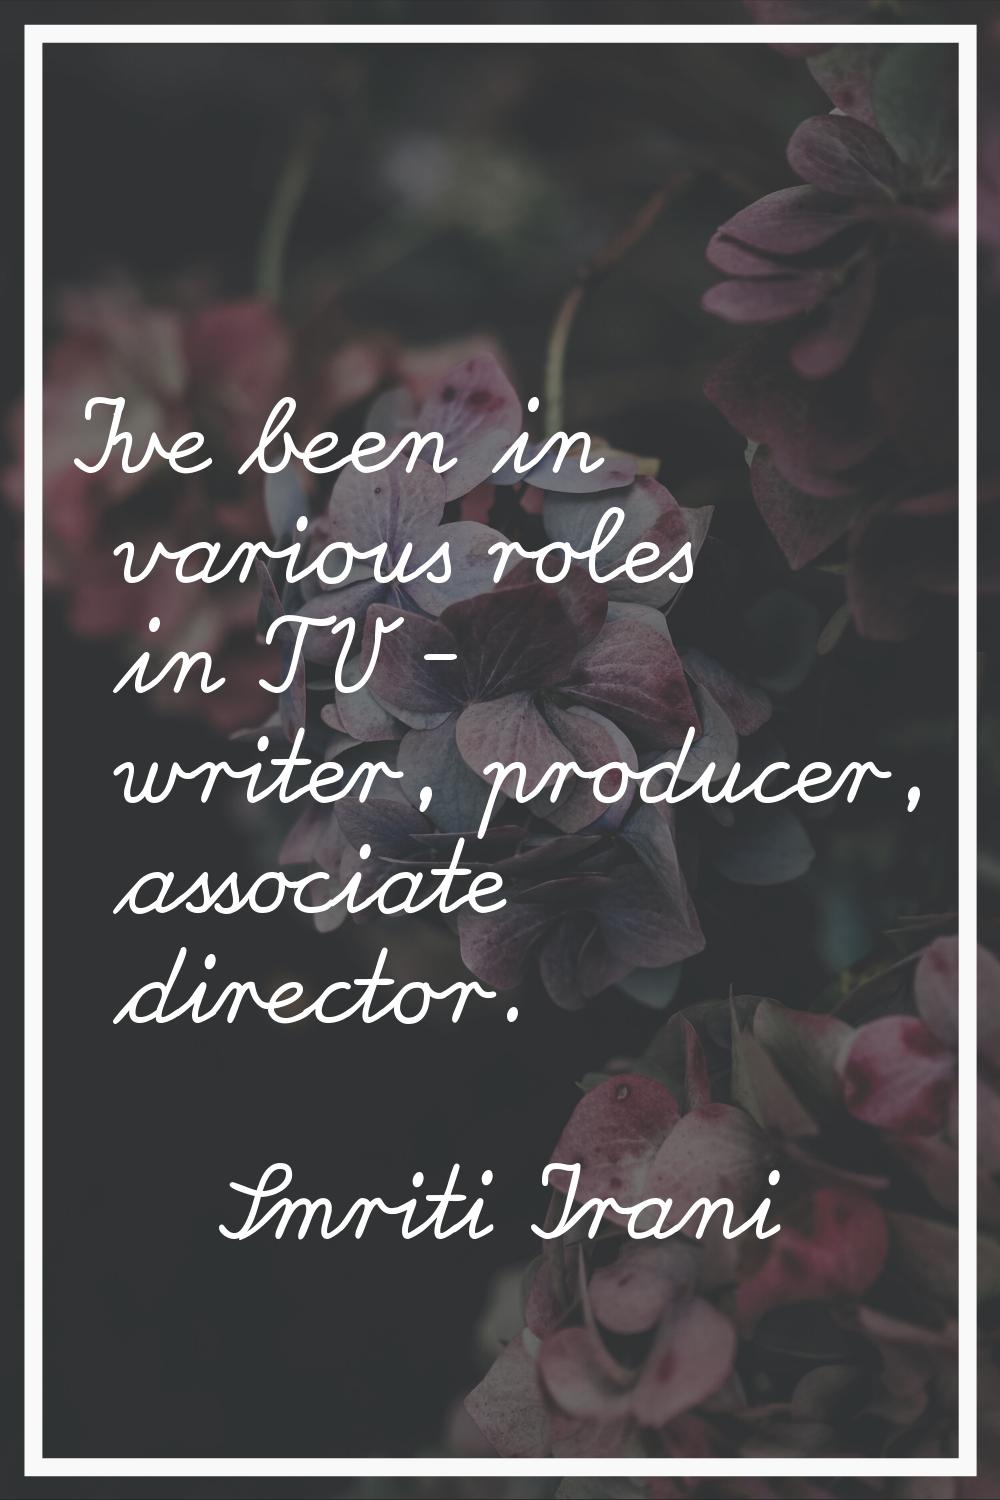 I've been in various roles in TV - writer, producer, associate director.